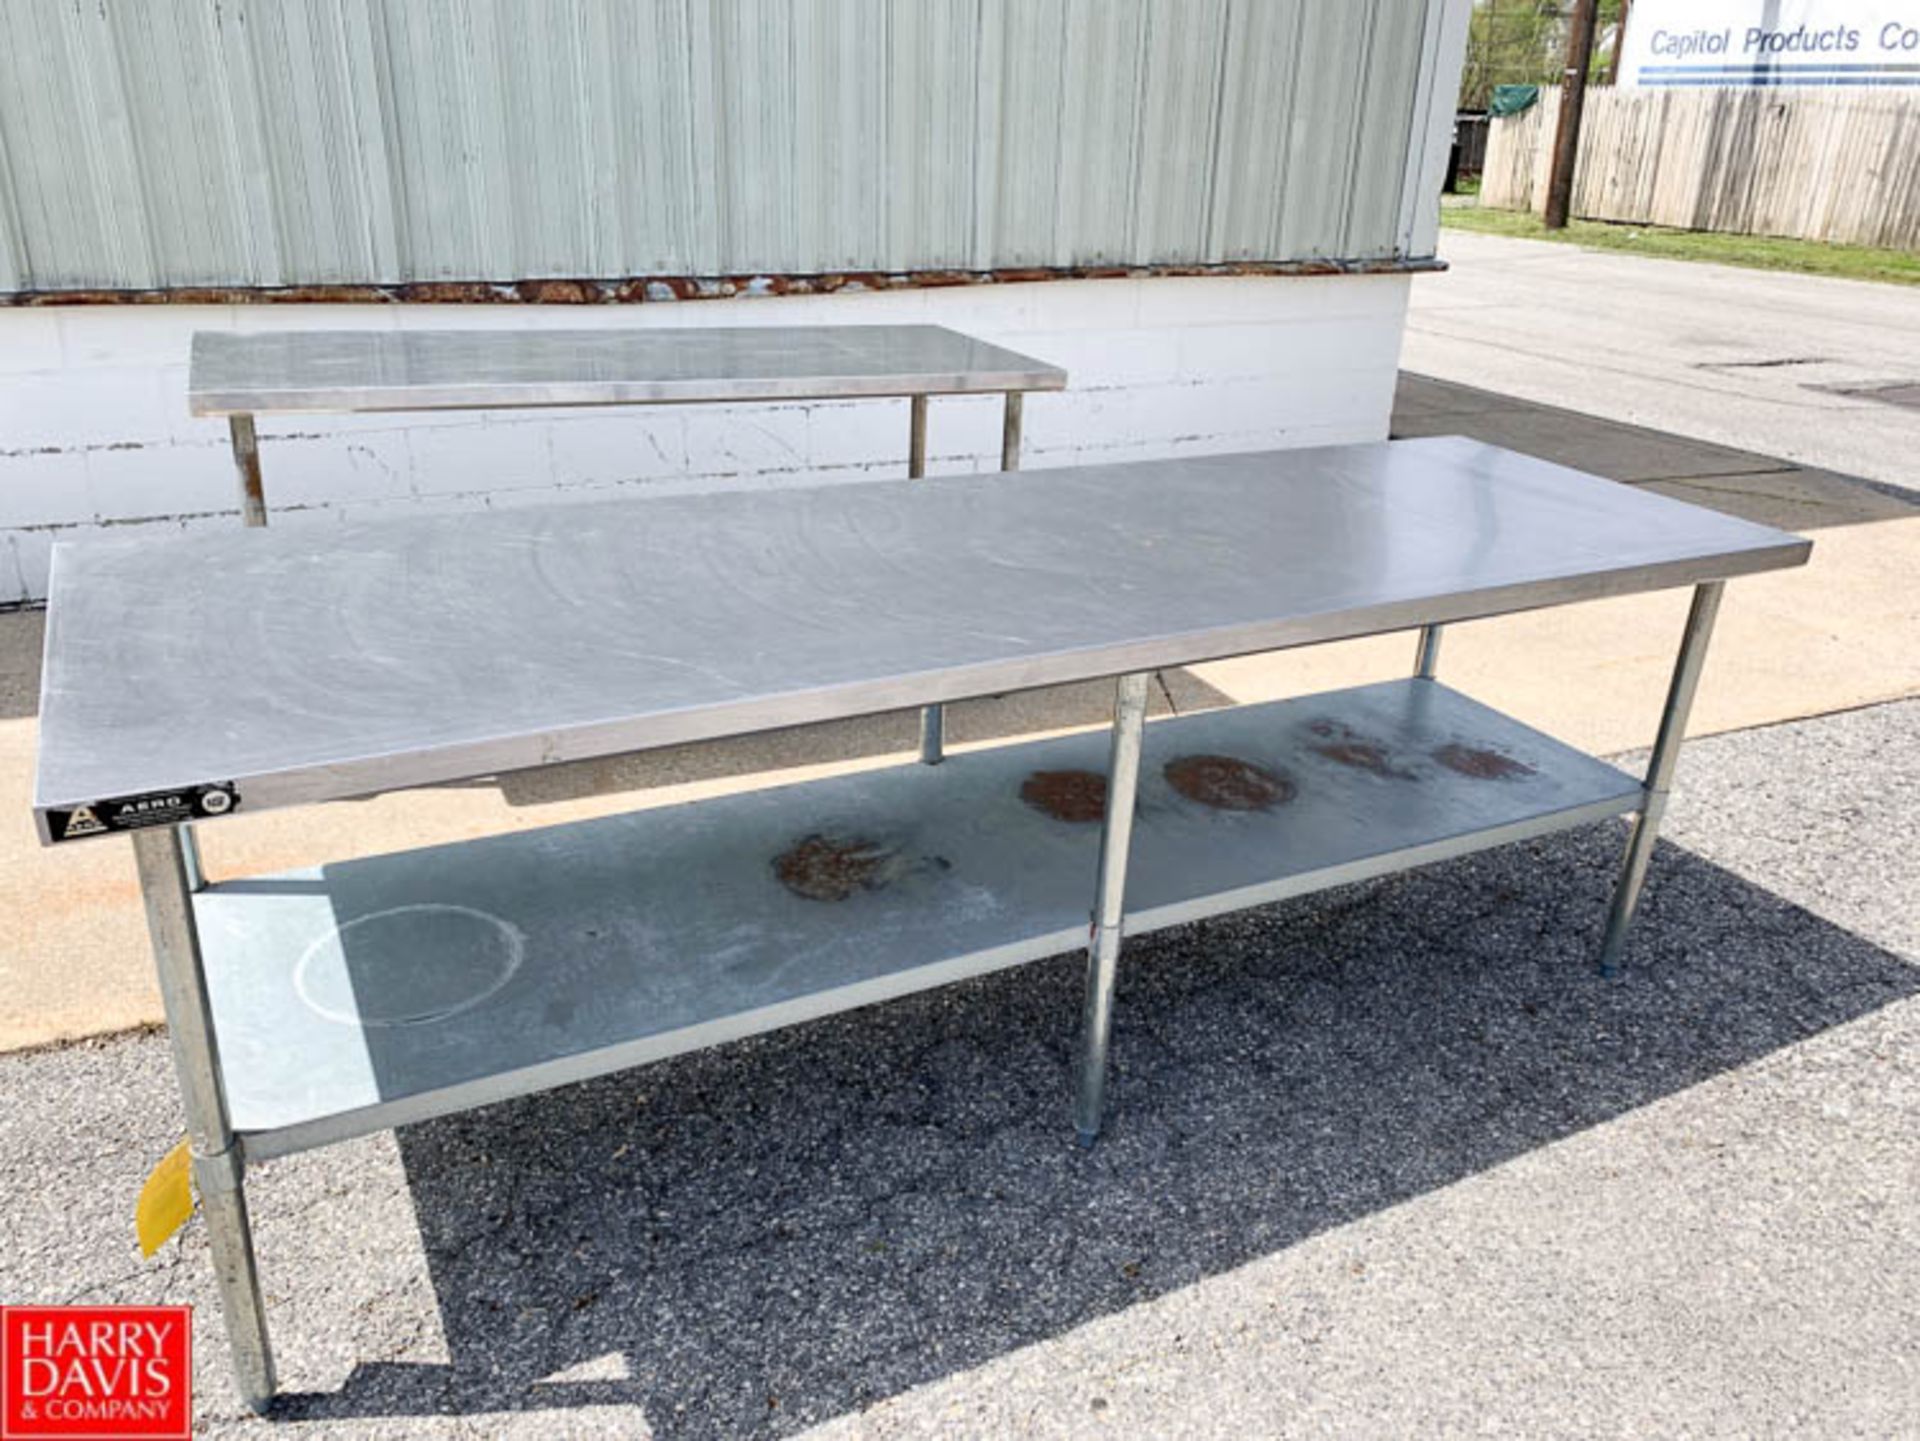 Aero S/S Top Table with Under Shelf , 30" x 96" - Rigging Fee: $10